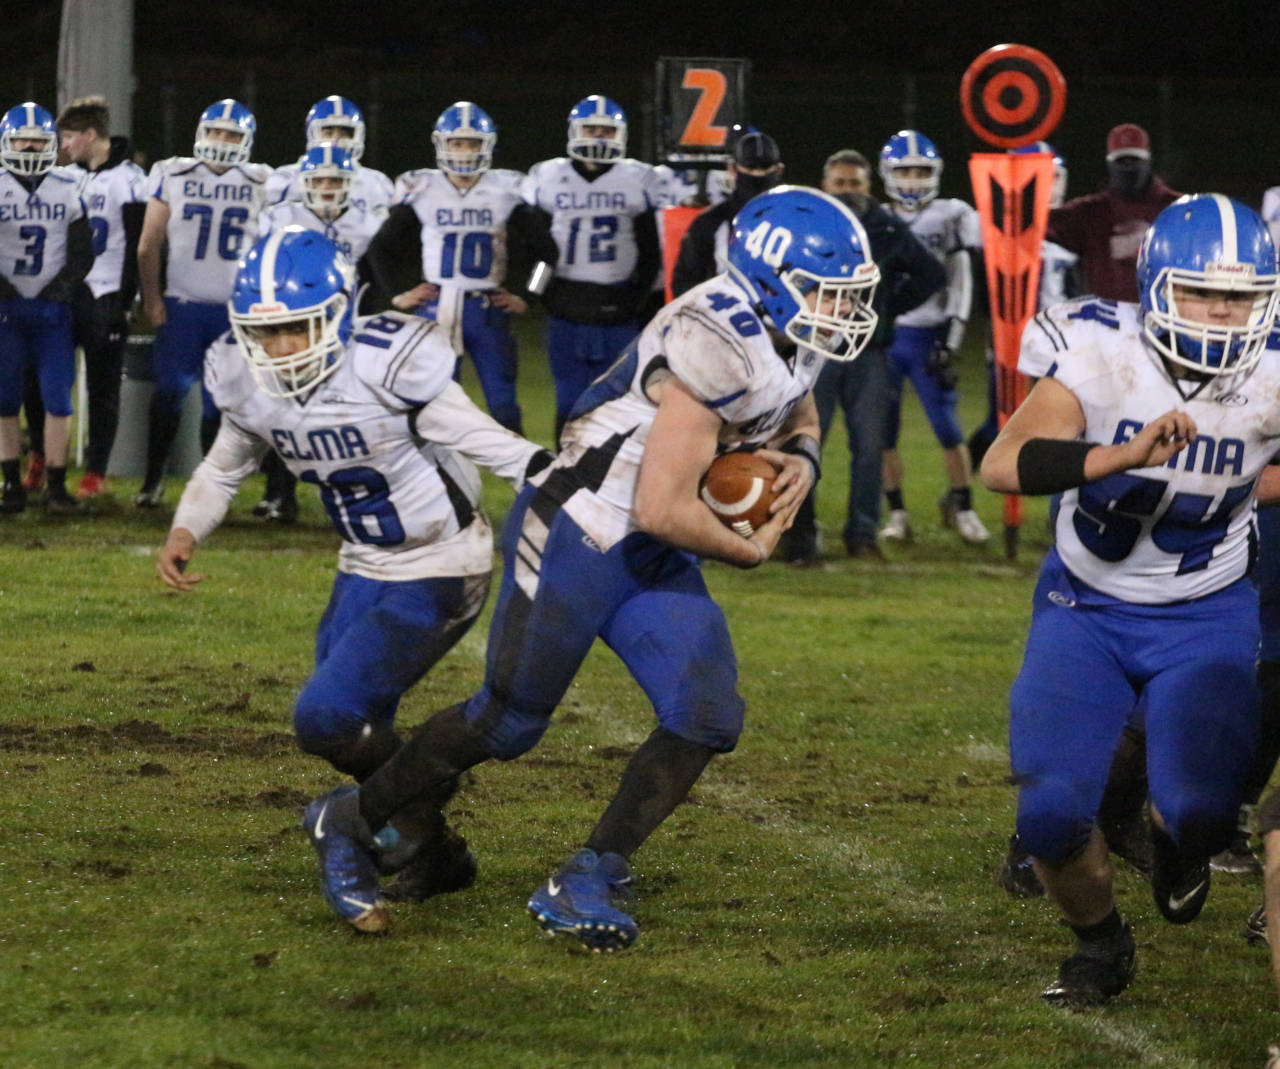 Elma running back Conan Baxter (40) receives a hand-off from quarterback René Duran during Elma’s 32-8 victory over Hoquiam on Friday in Hoquiam. (Ryan Sparks | The Daily World)